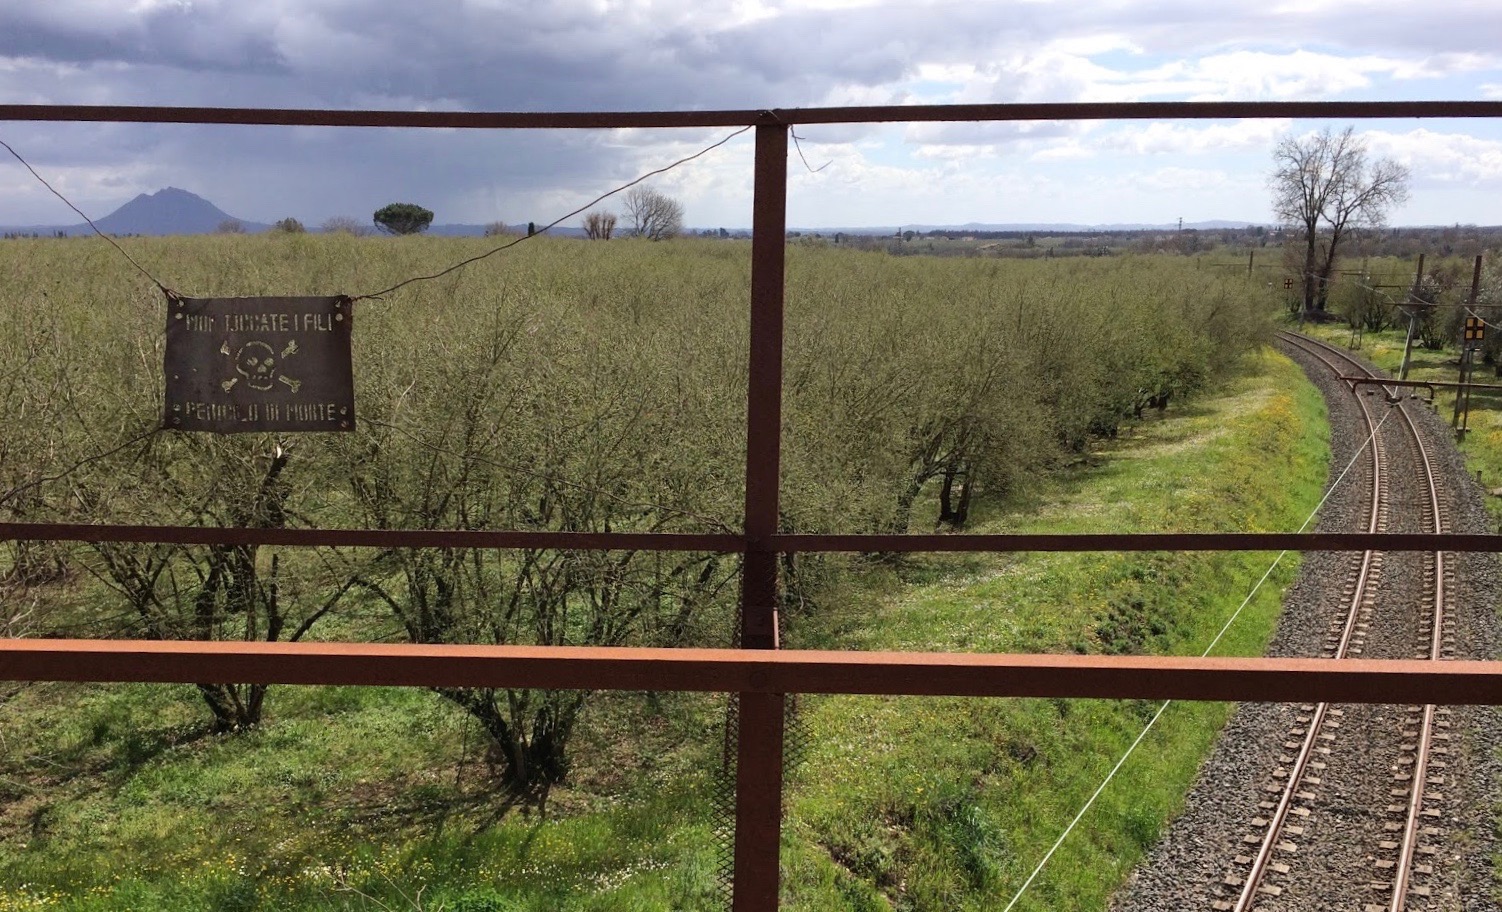 View from a viaduct over a hazelnut plantation